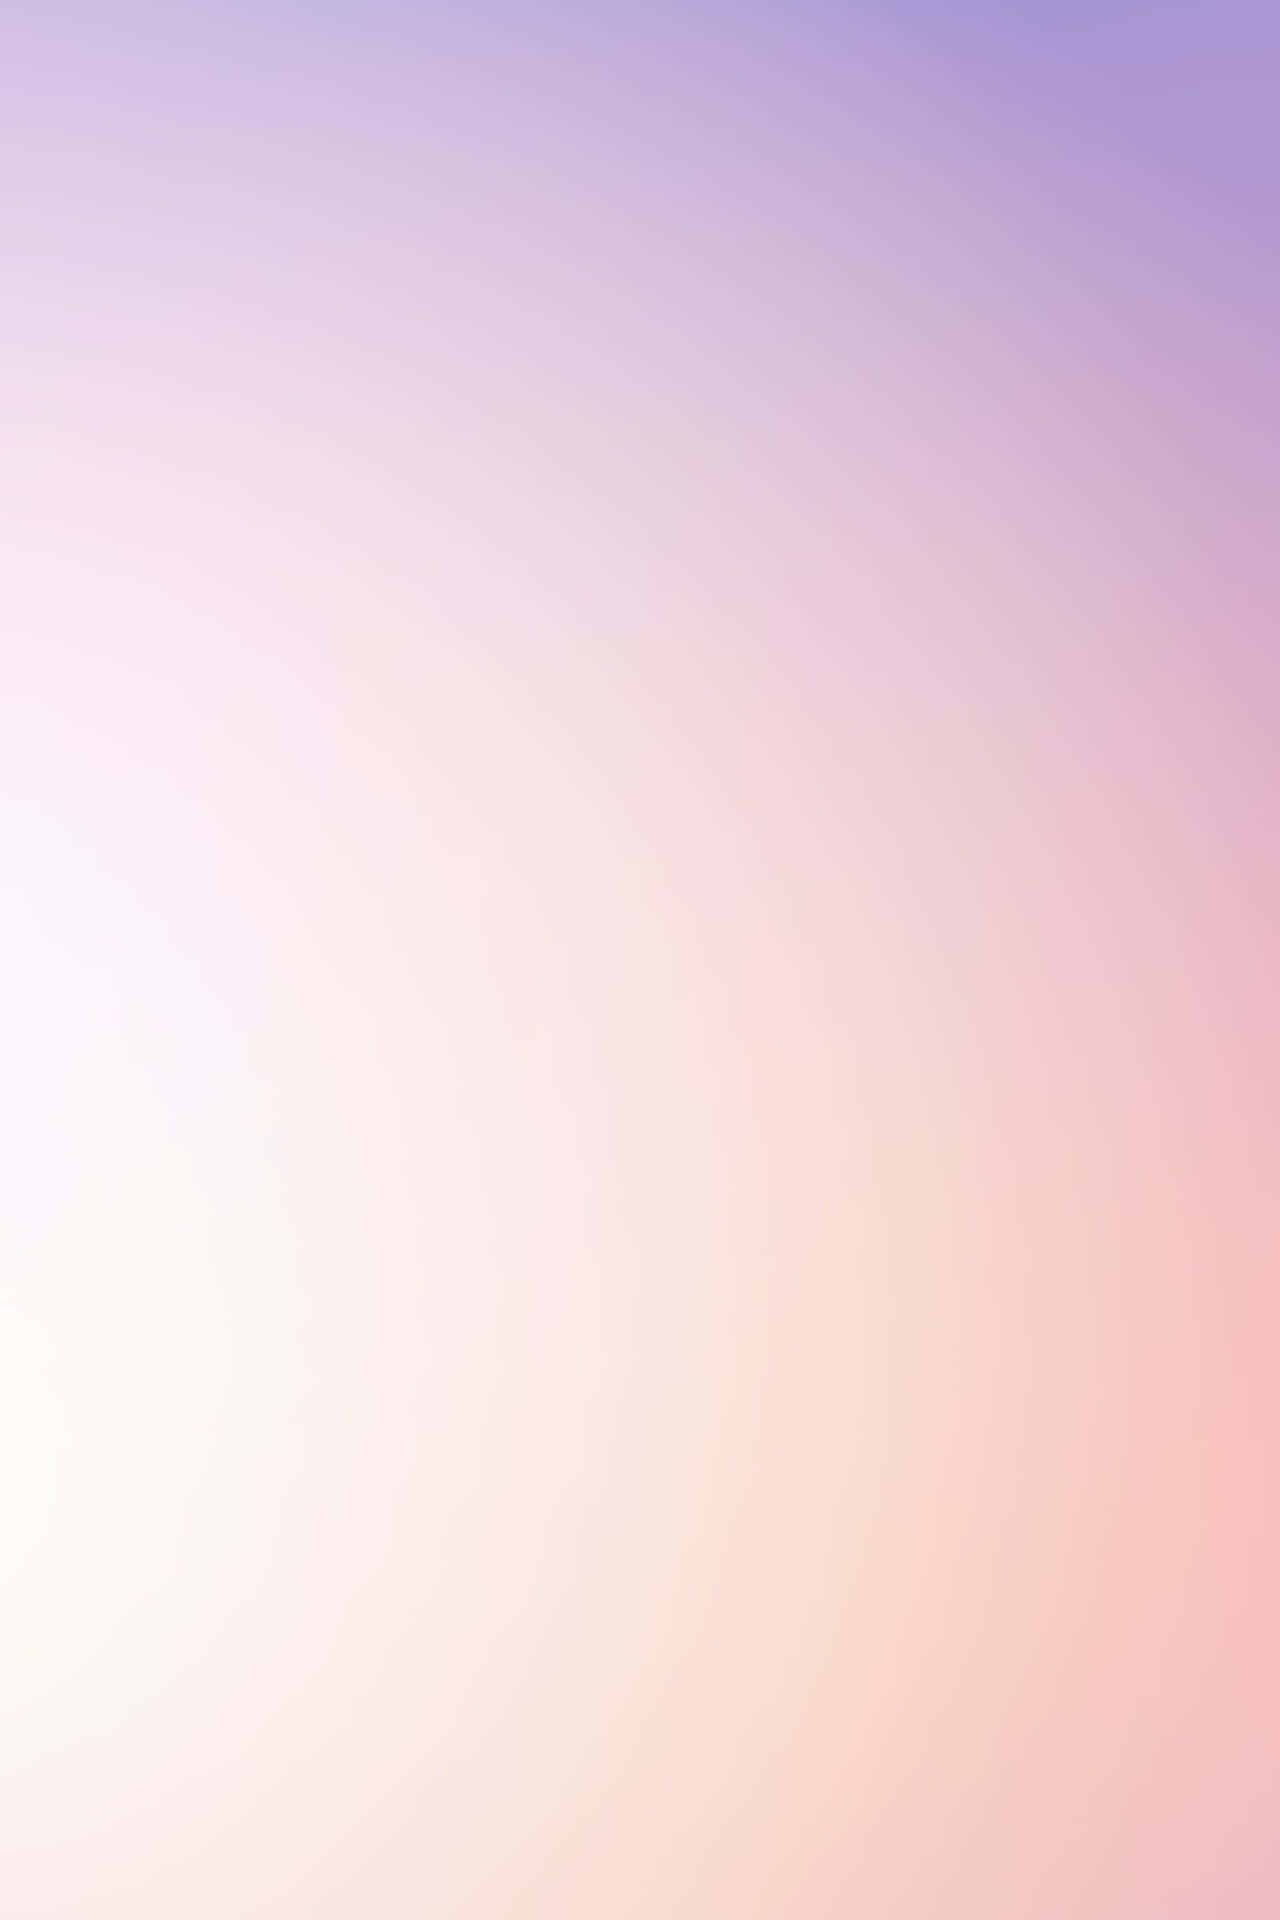 Pale Pink Background Colors Combination